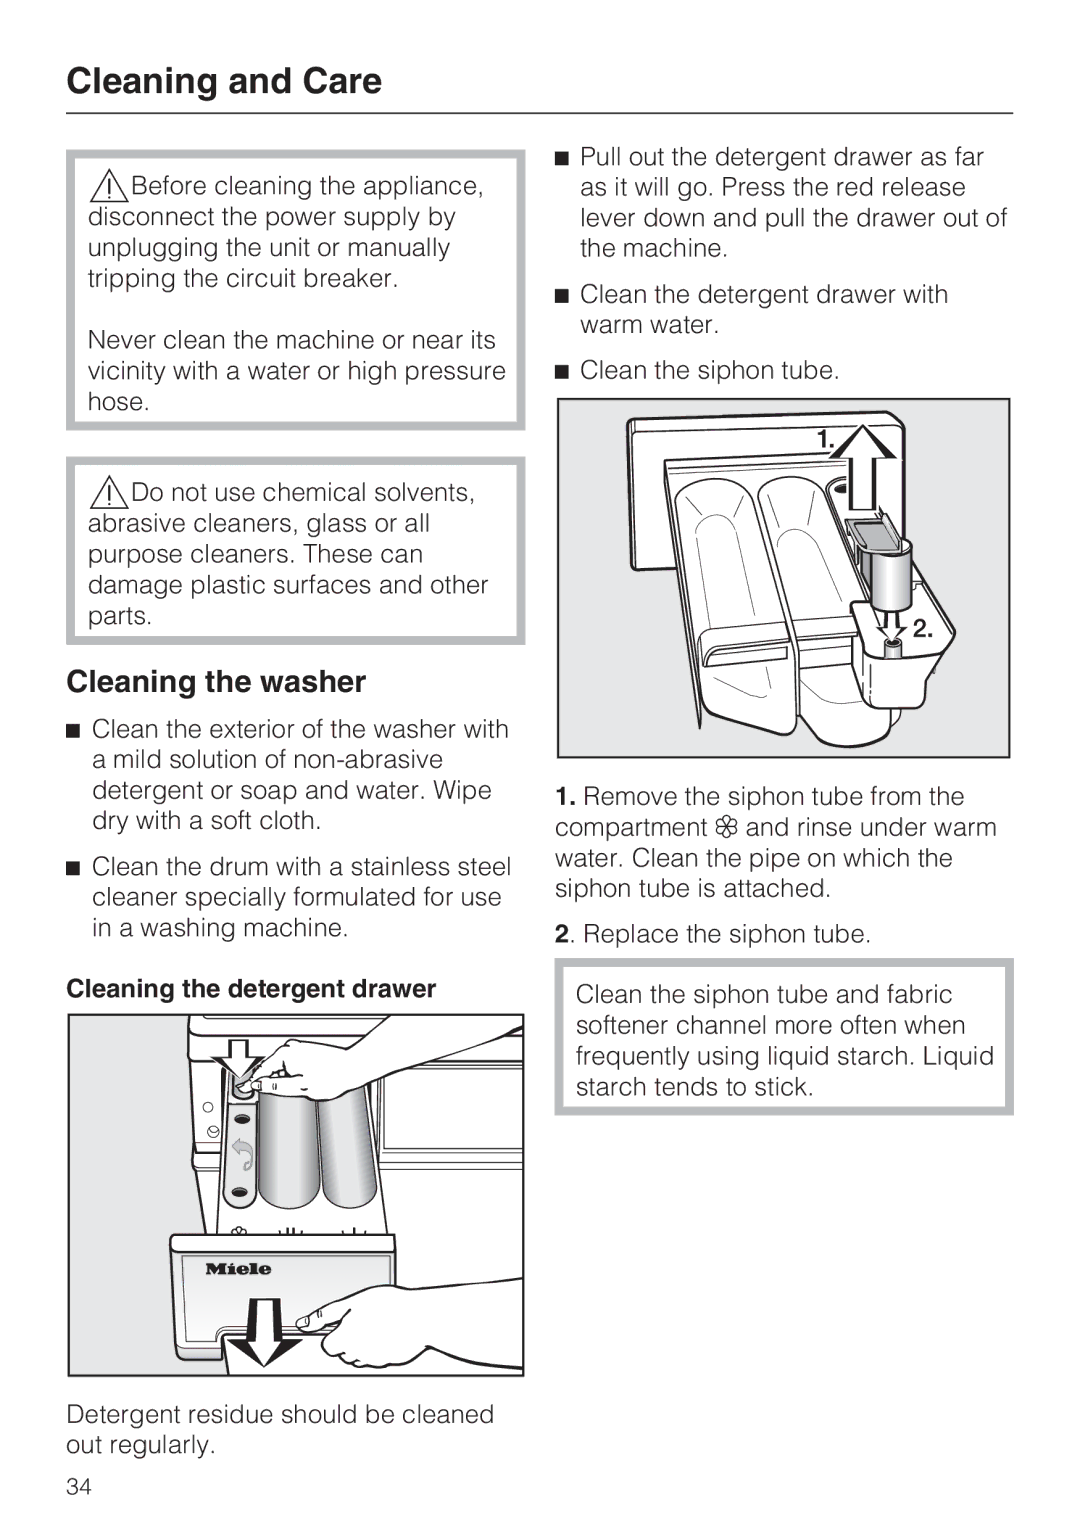 Miele 07 509 320 operating instructions Cleaning and Care, Cleaning the washer, Cleaning the detergent drawer 